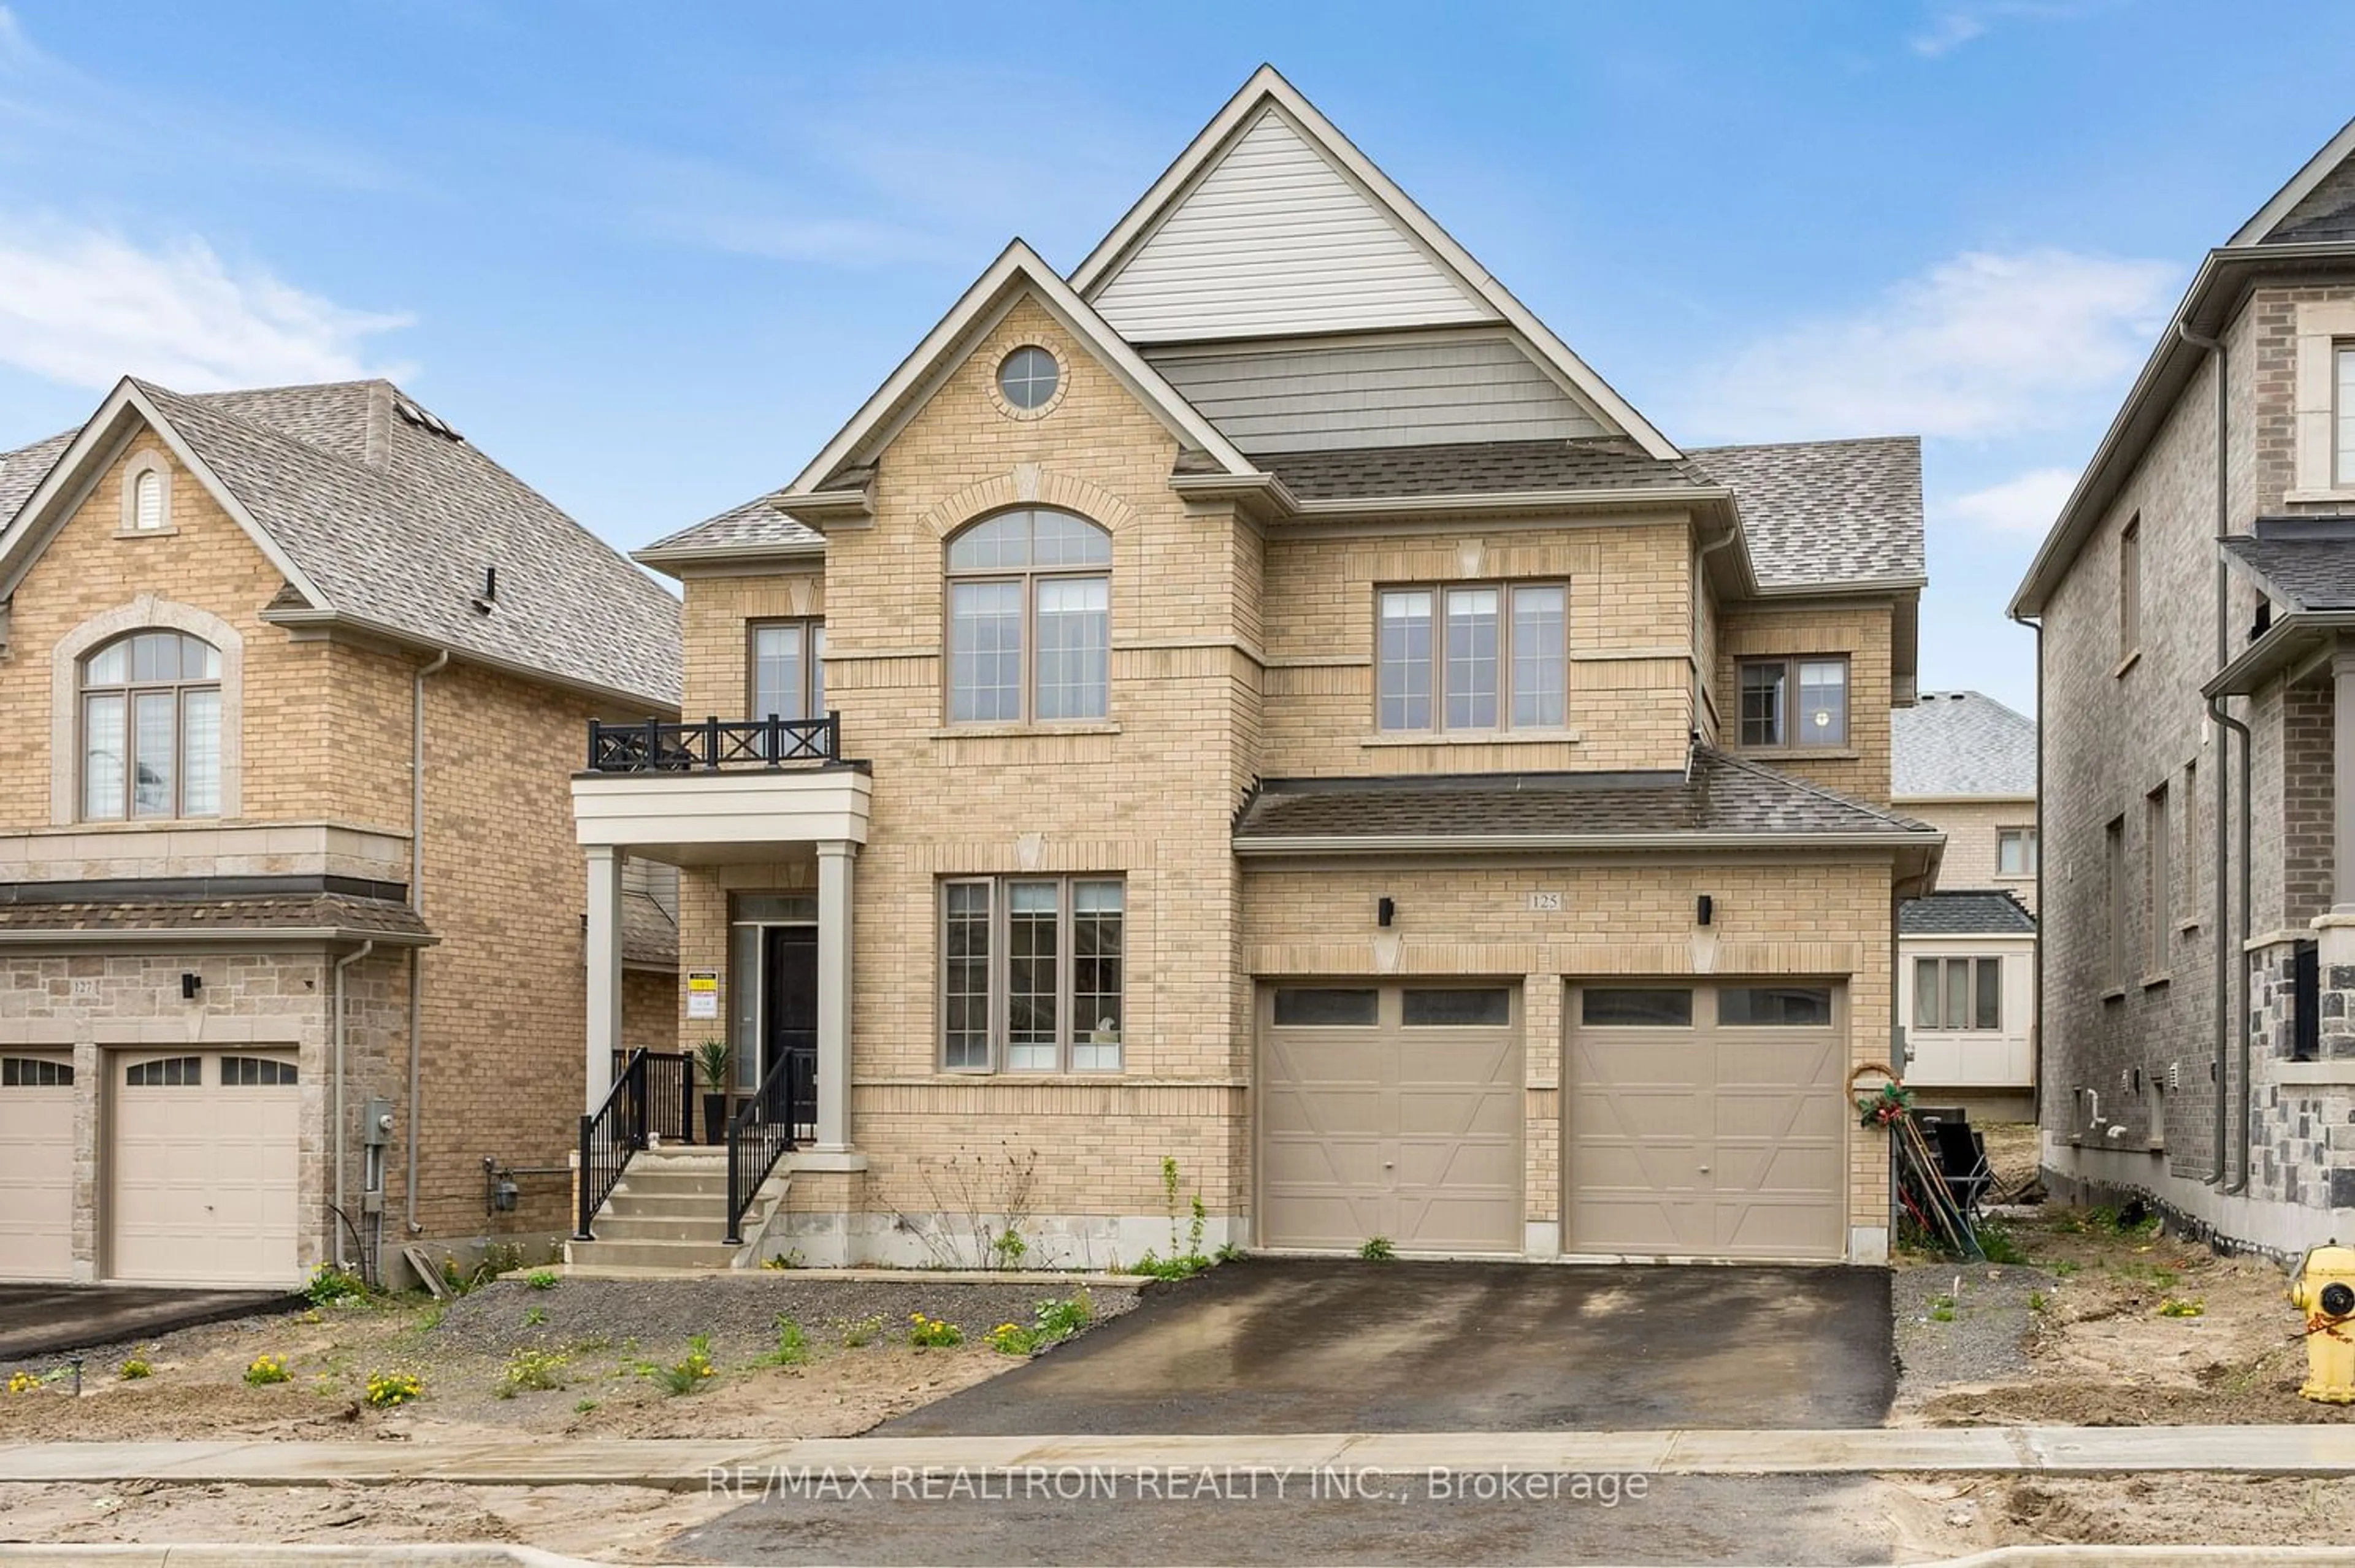 Home with brick exterior material for 125 Silk Twist Dr, East Gwillimbury Ontario L9N 0E5